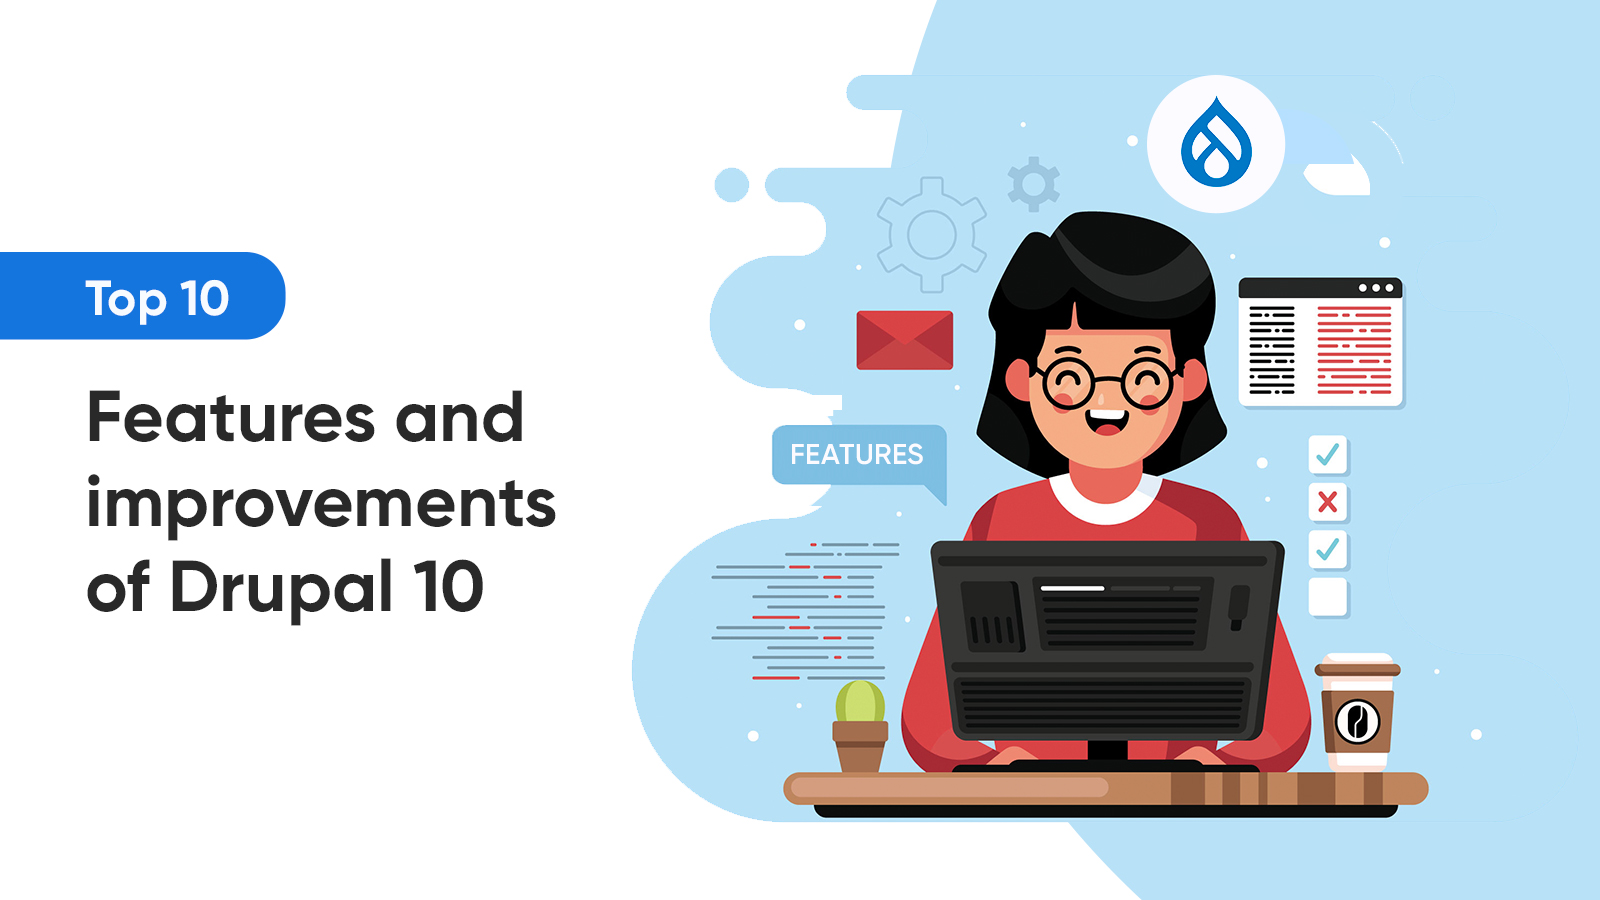 Drupal 10: Top 10 Features and Improvements